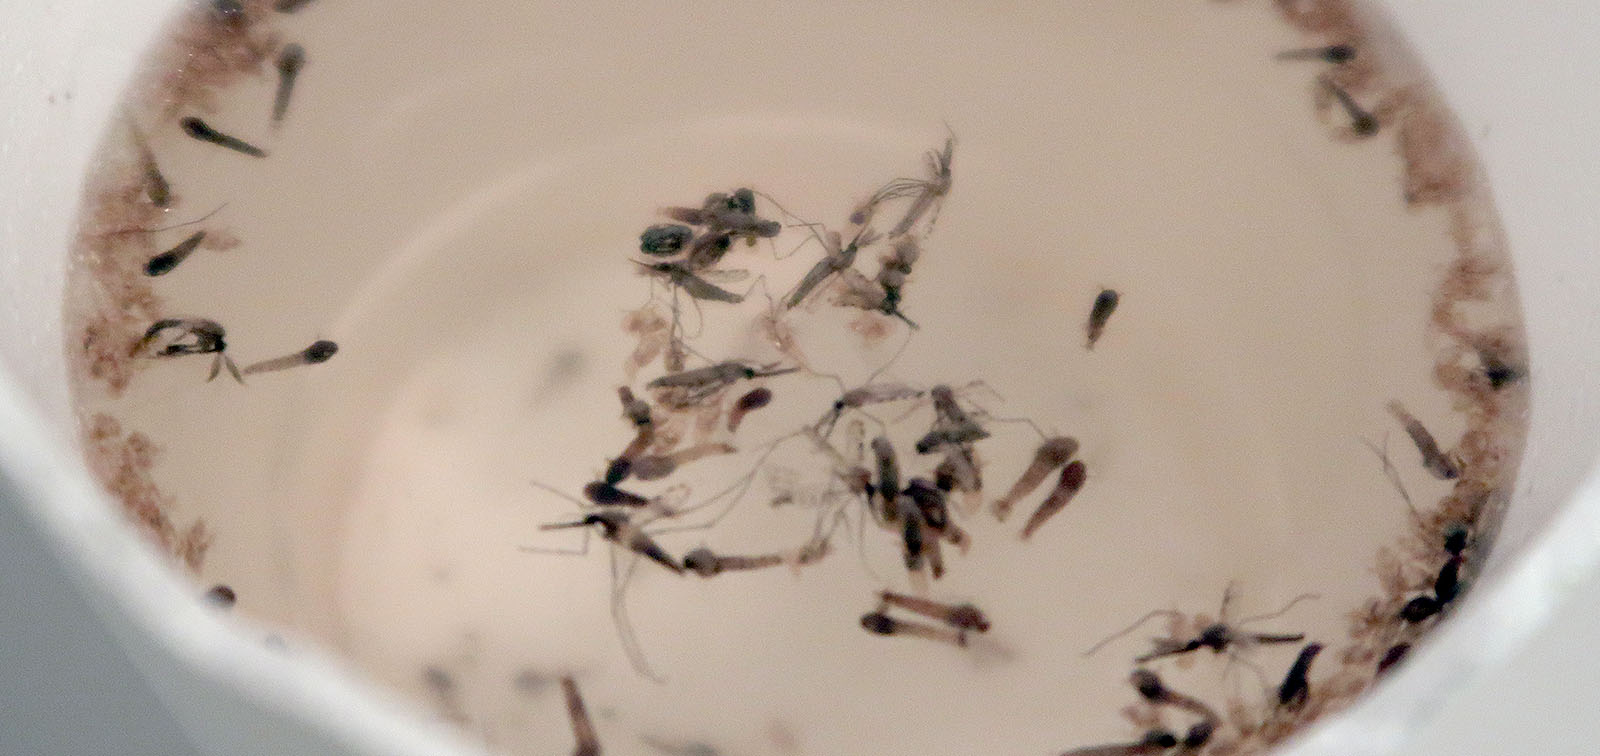 Mature adult Anopheles mosquitoes emerge from pupae